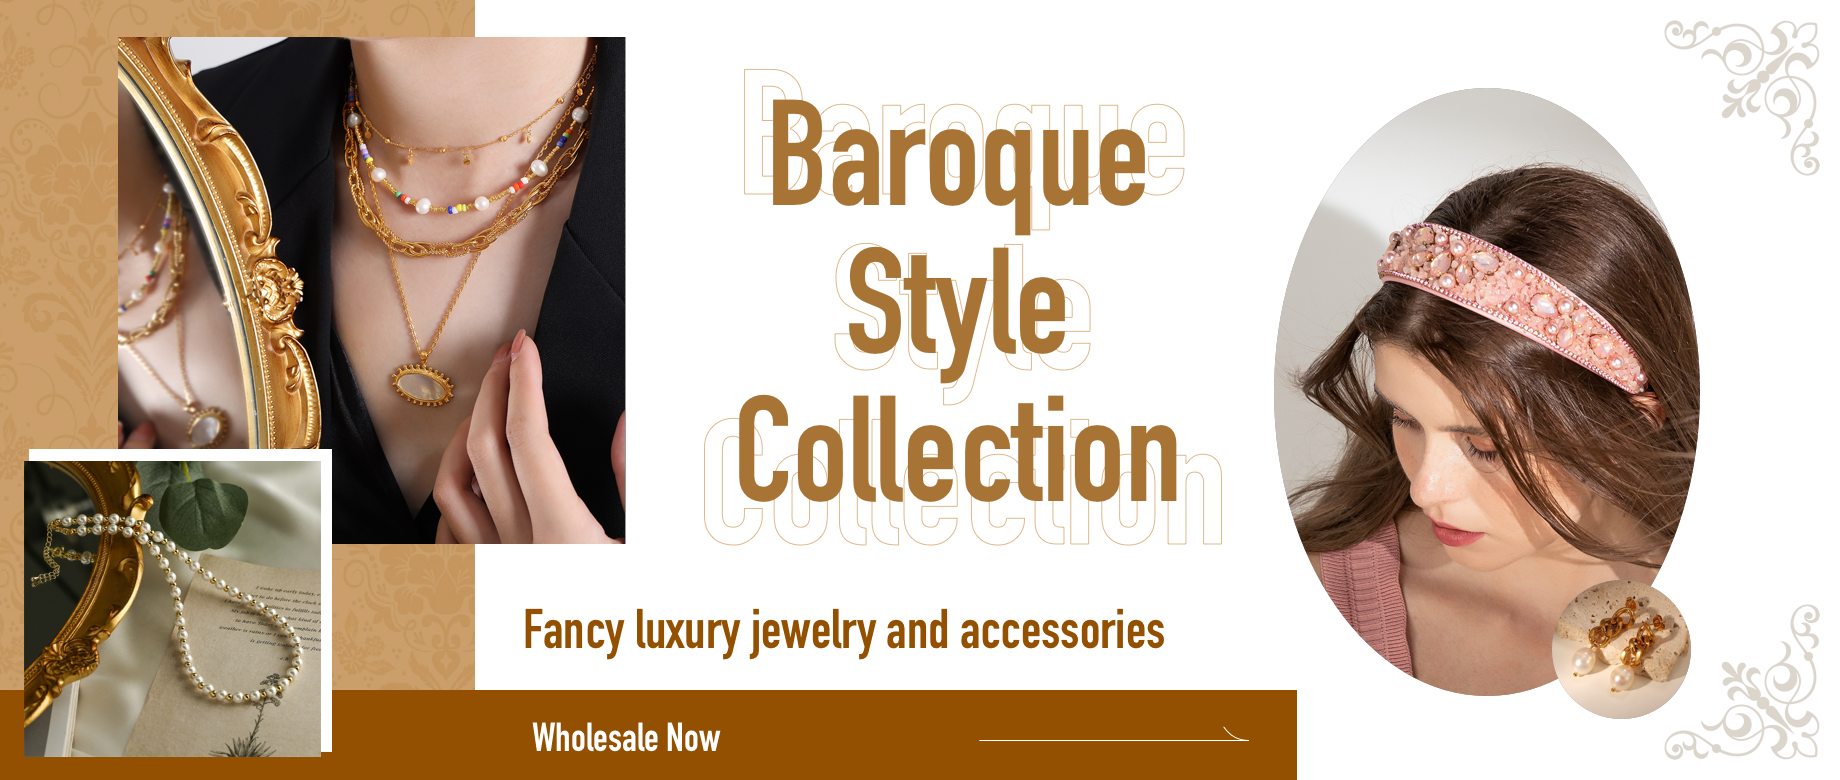 KEEP UP WITH THE TRENDY FASHION OF THIS YEAR - BAROQUE COLLECTIONS THAT WILL MAKE YOUR TEMPERAMENT UNIQUE